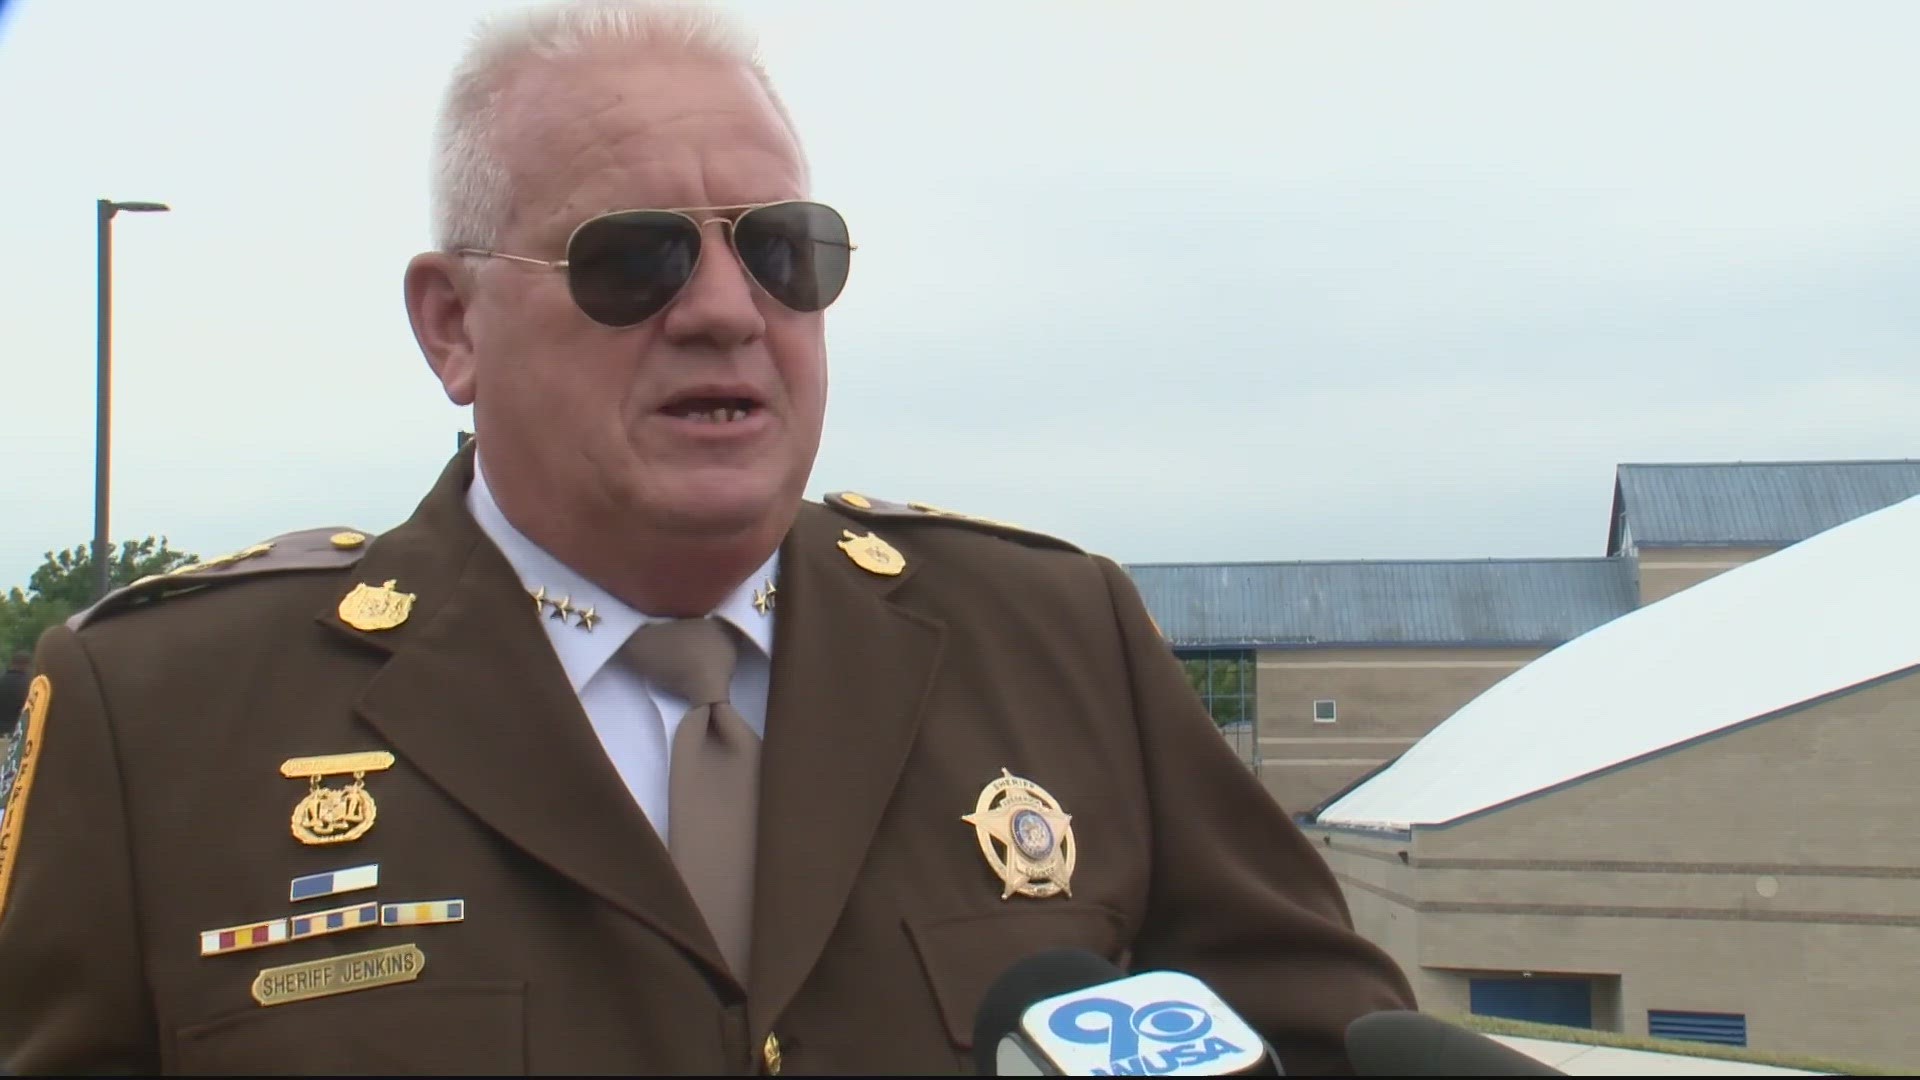 Charles Jenkins will remain as acting sheriff despite the indictment, according to a county spokesperson.